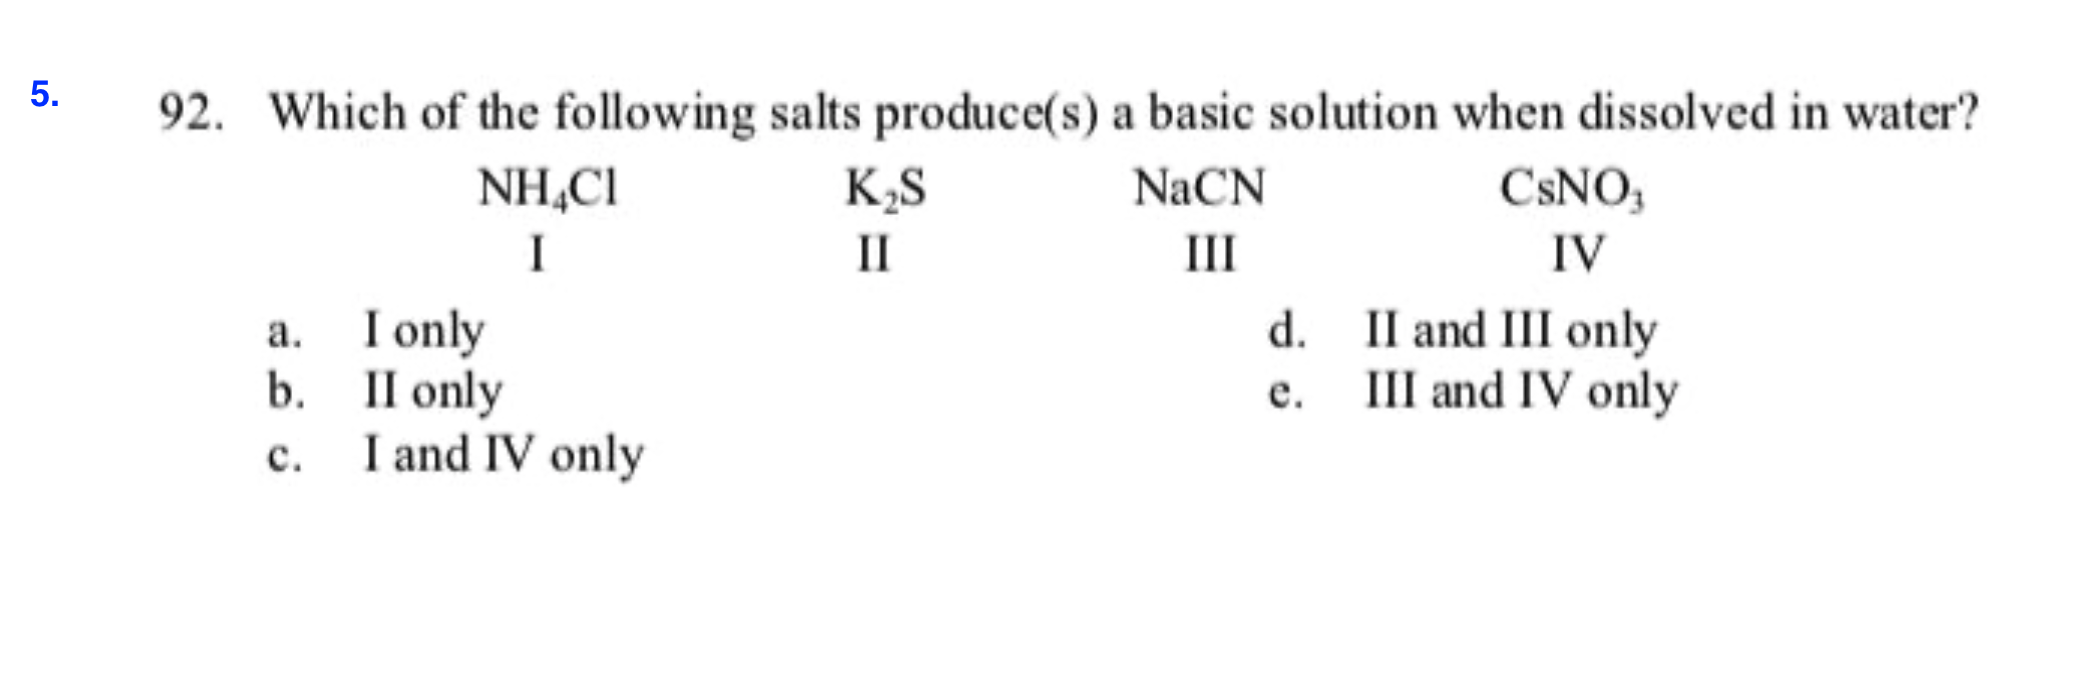 5.
92. Which of the following salts produce(s) a basic solution when dissolved in water?
CSNO
NH CI
K.S
NaCN
II
Ш
IV
I
I only
II only
b.
I and IV only
d.
II and III only
III and IV only
а.
е.
c.
